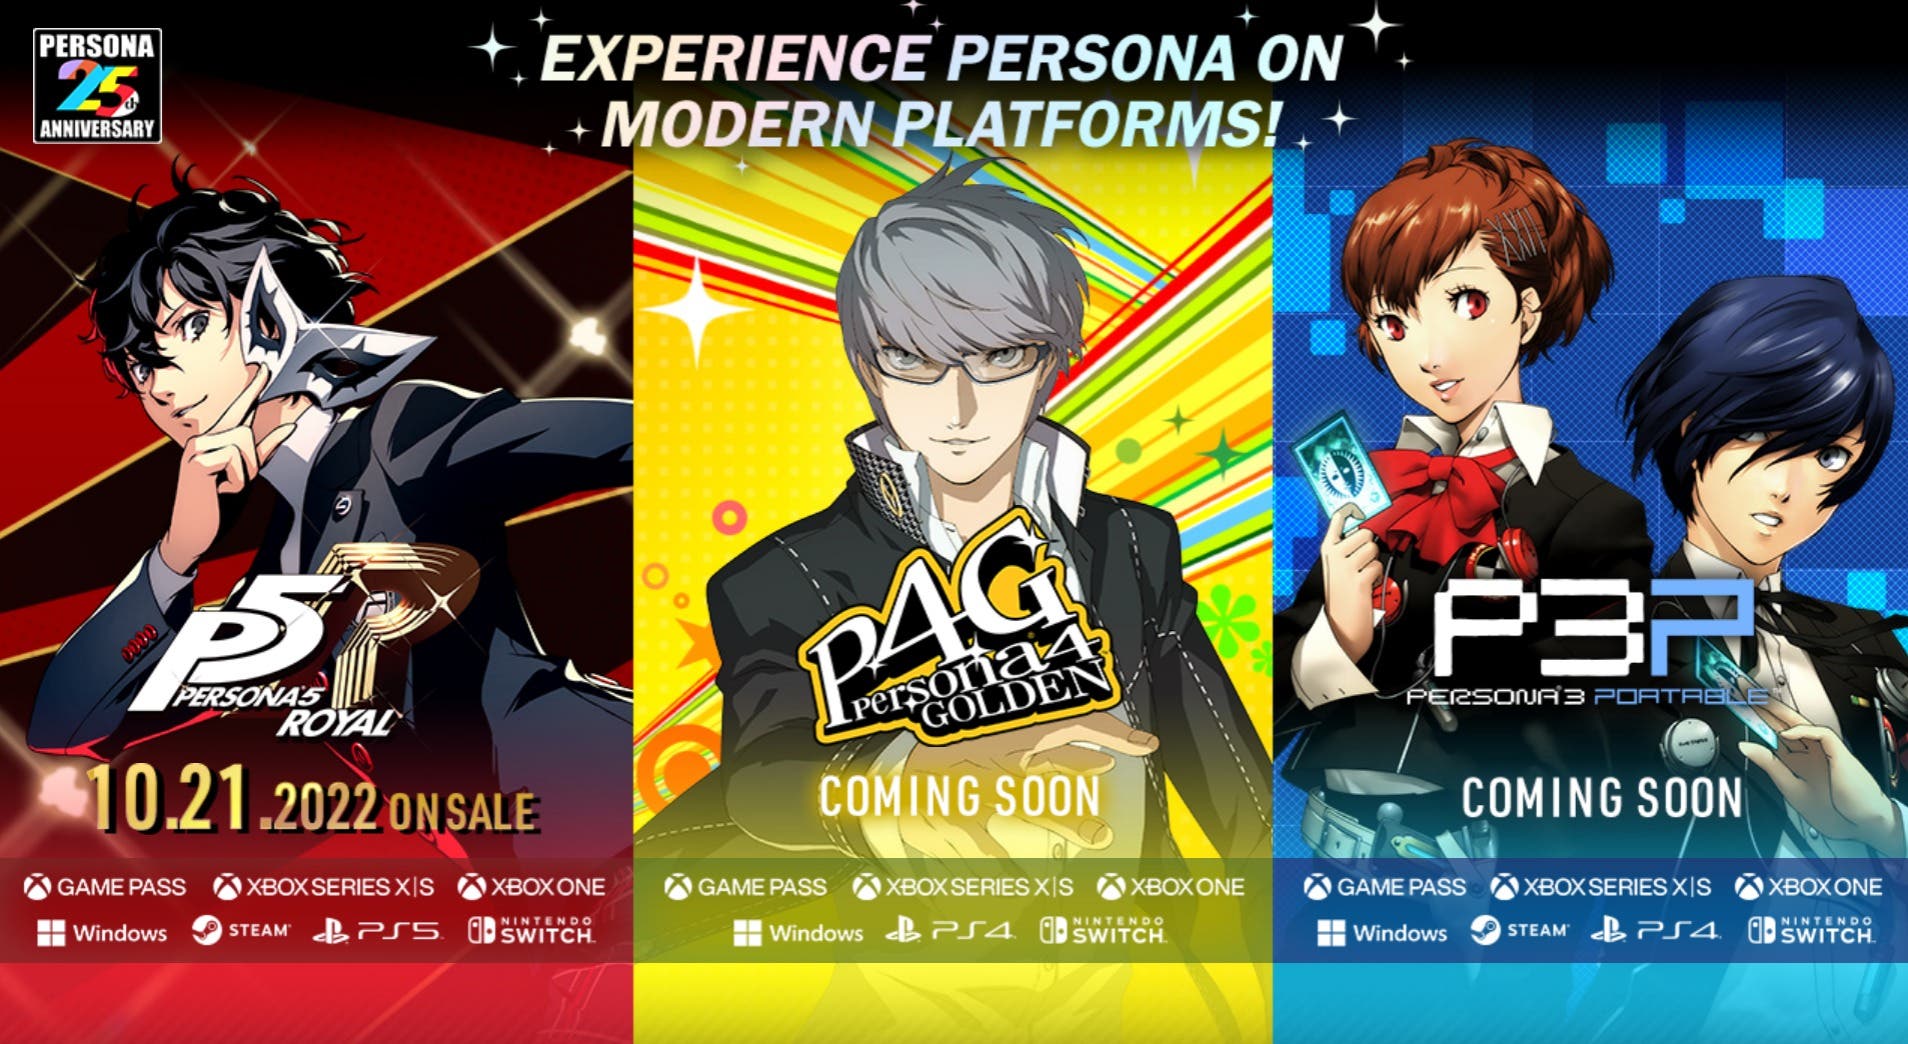 Persona 3 Portable, Persona 4 Golden, and Persona 5 Royal arrive on Nintendo Switch on October 21